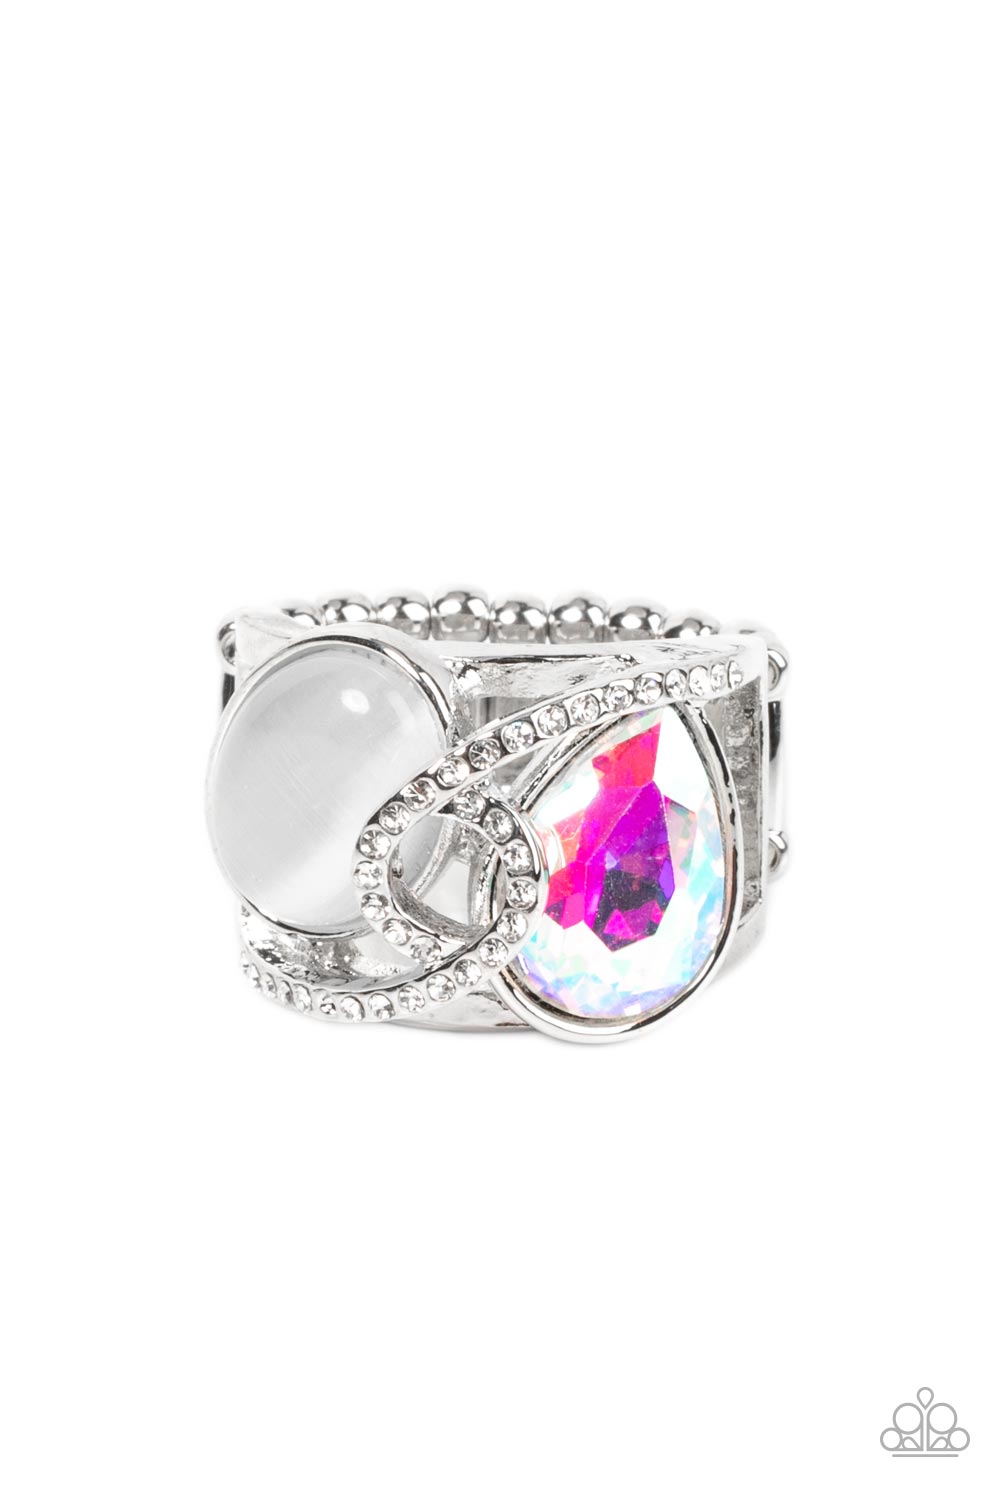 SELFIE-Indulgence Multi Ring - Paparazzi Accessories  A white rhinestone dotted silver ribbon loops and slants over a tilted white cat's eye stone and iridescent teardrop gem, culminating into a stellar centerpiece. Features a stretchy band for a flexible fit.  Sold as one individual ring.